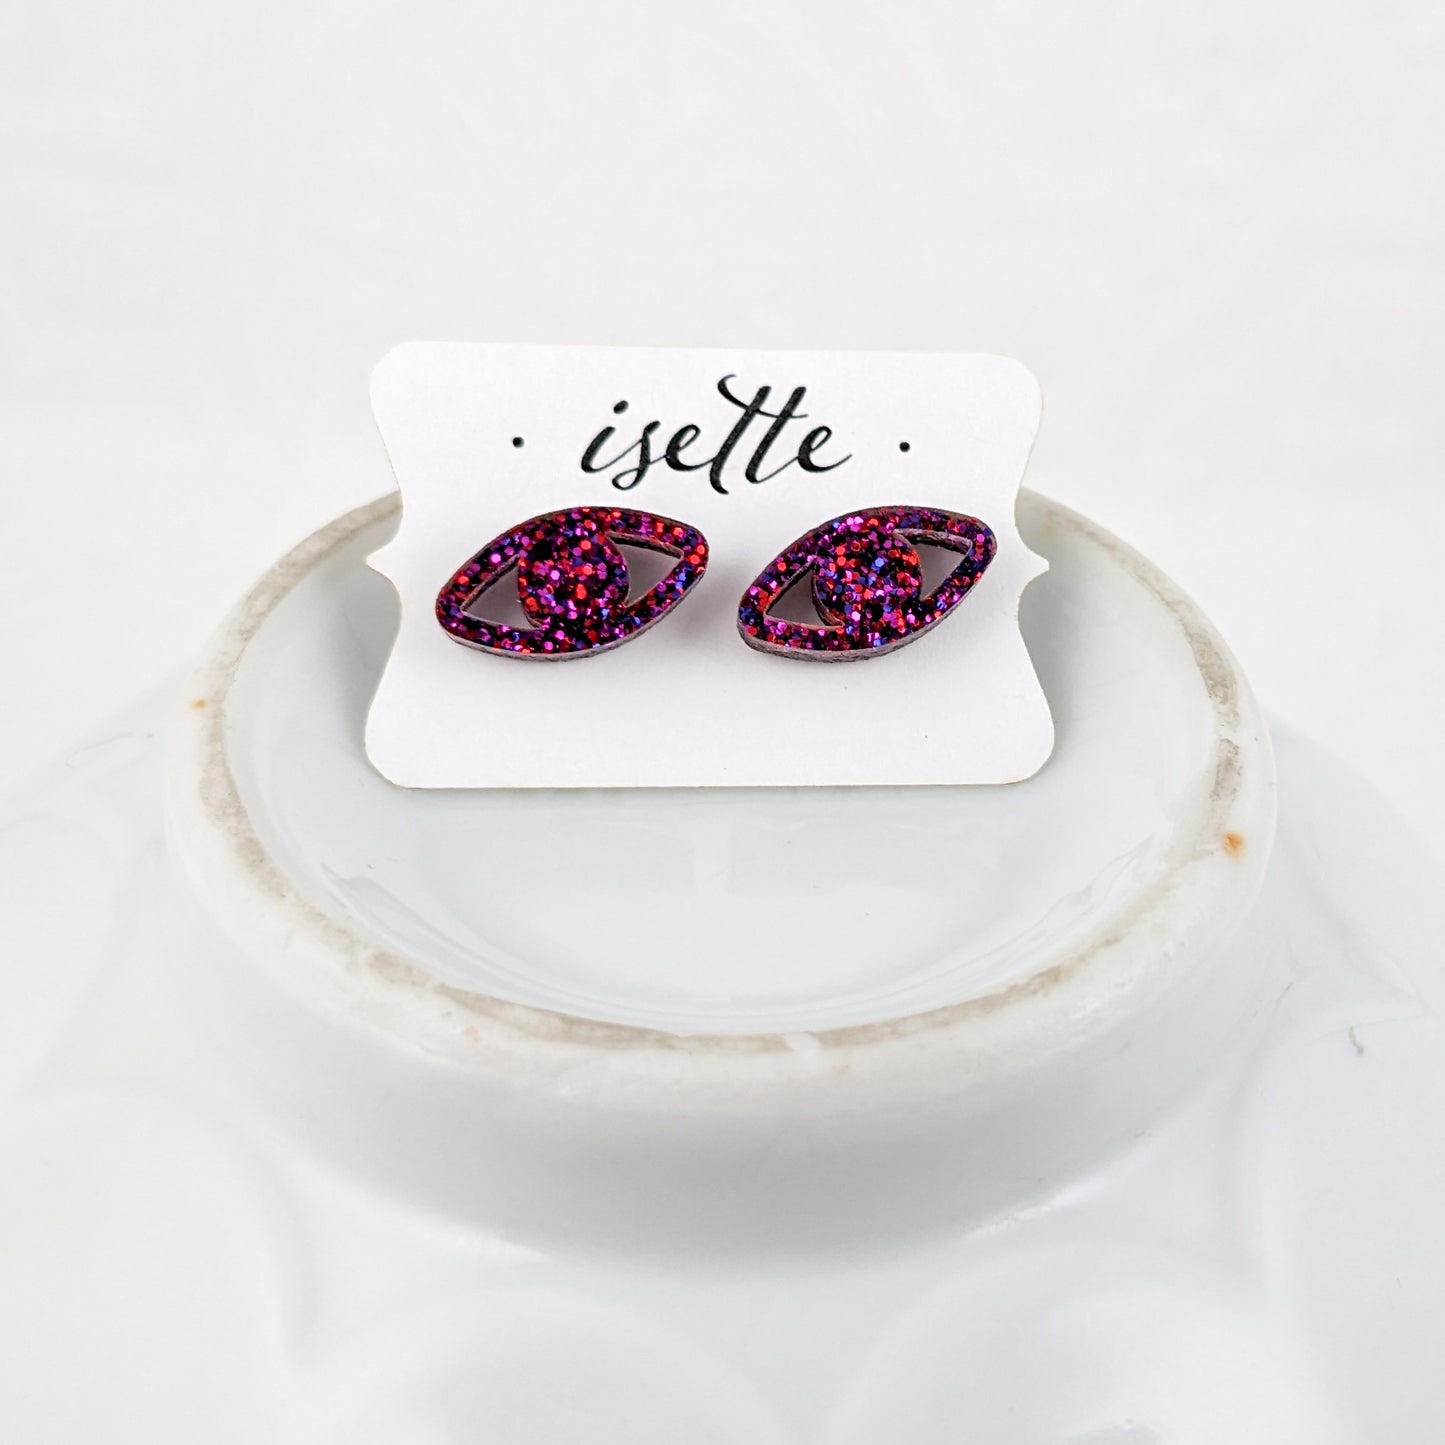 Eye shaped stud earrings made with ruby sparkle acrylic and stainless steel posts on Isette card